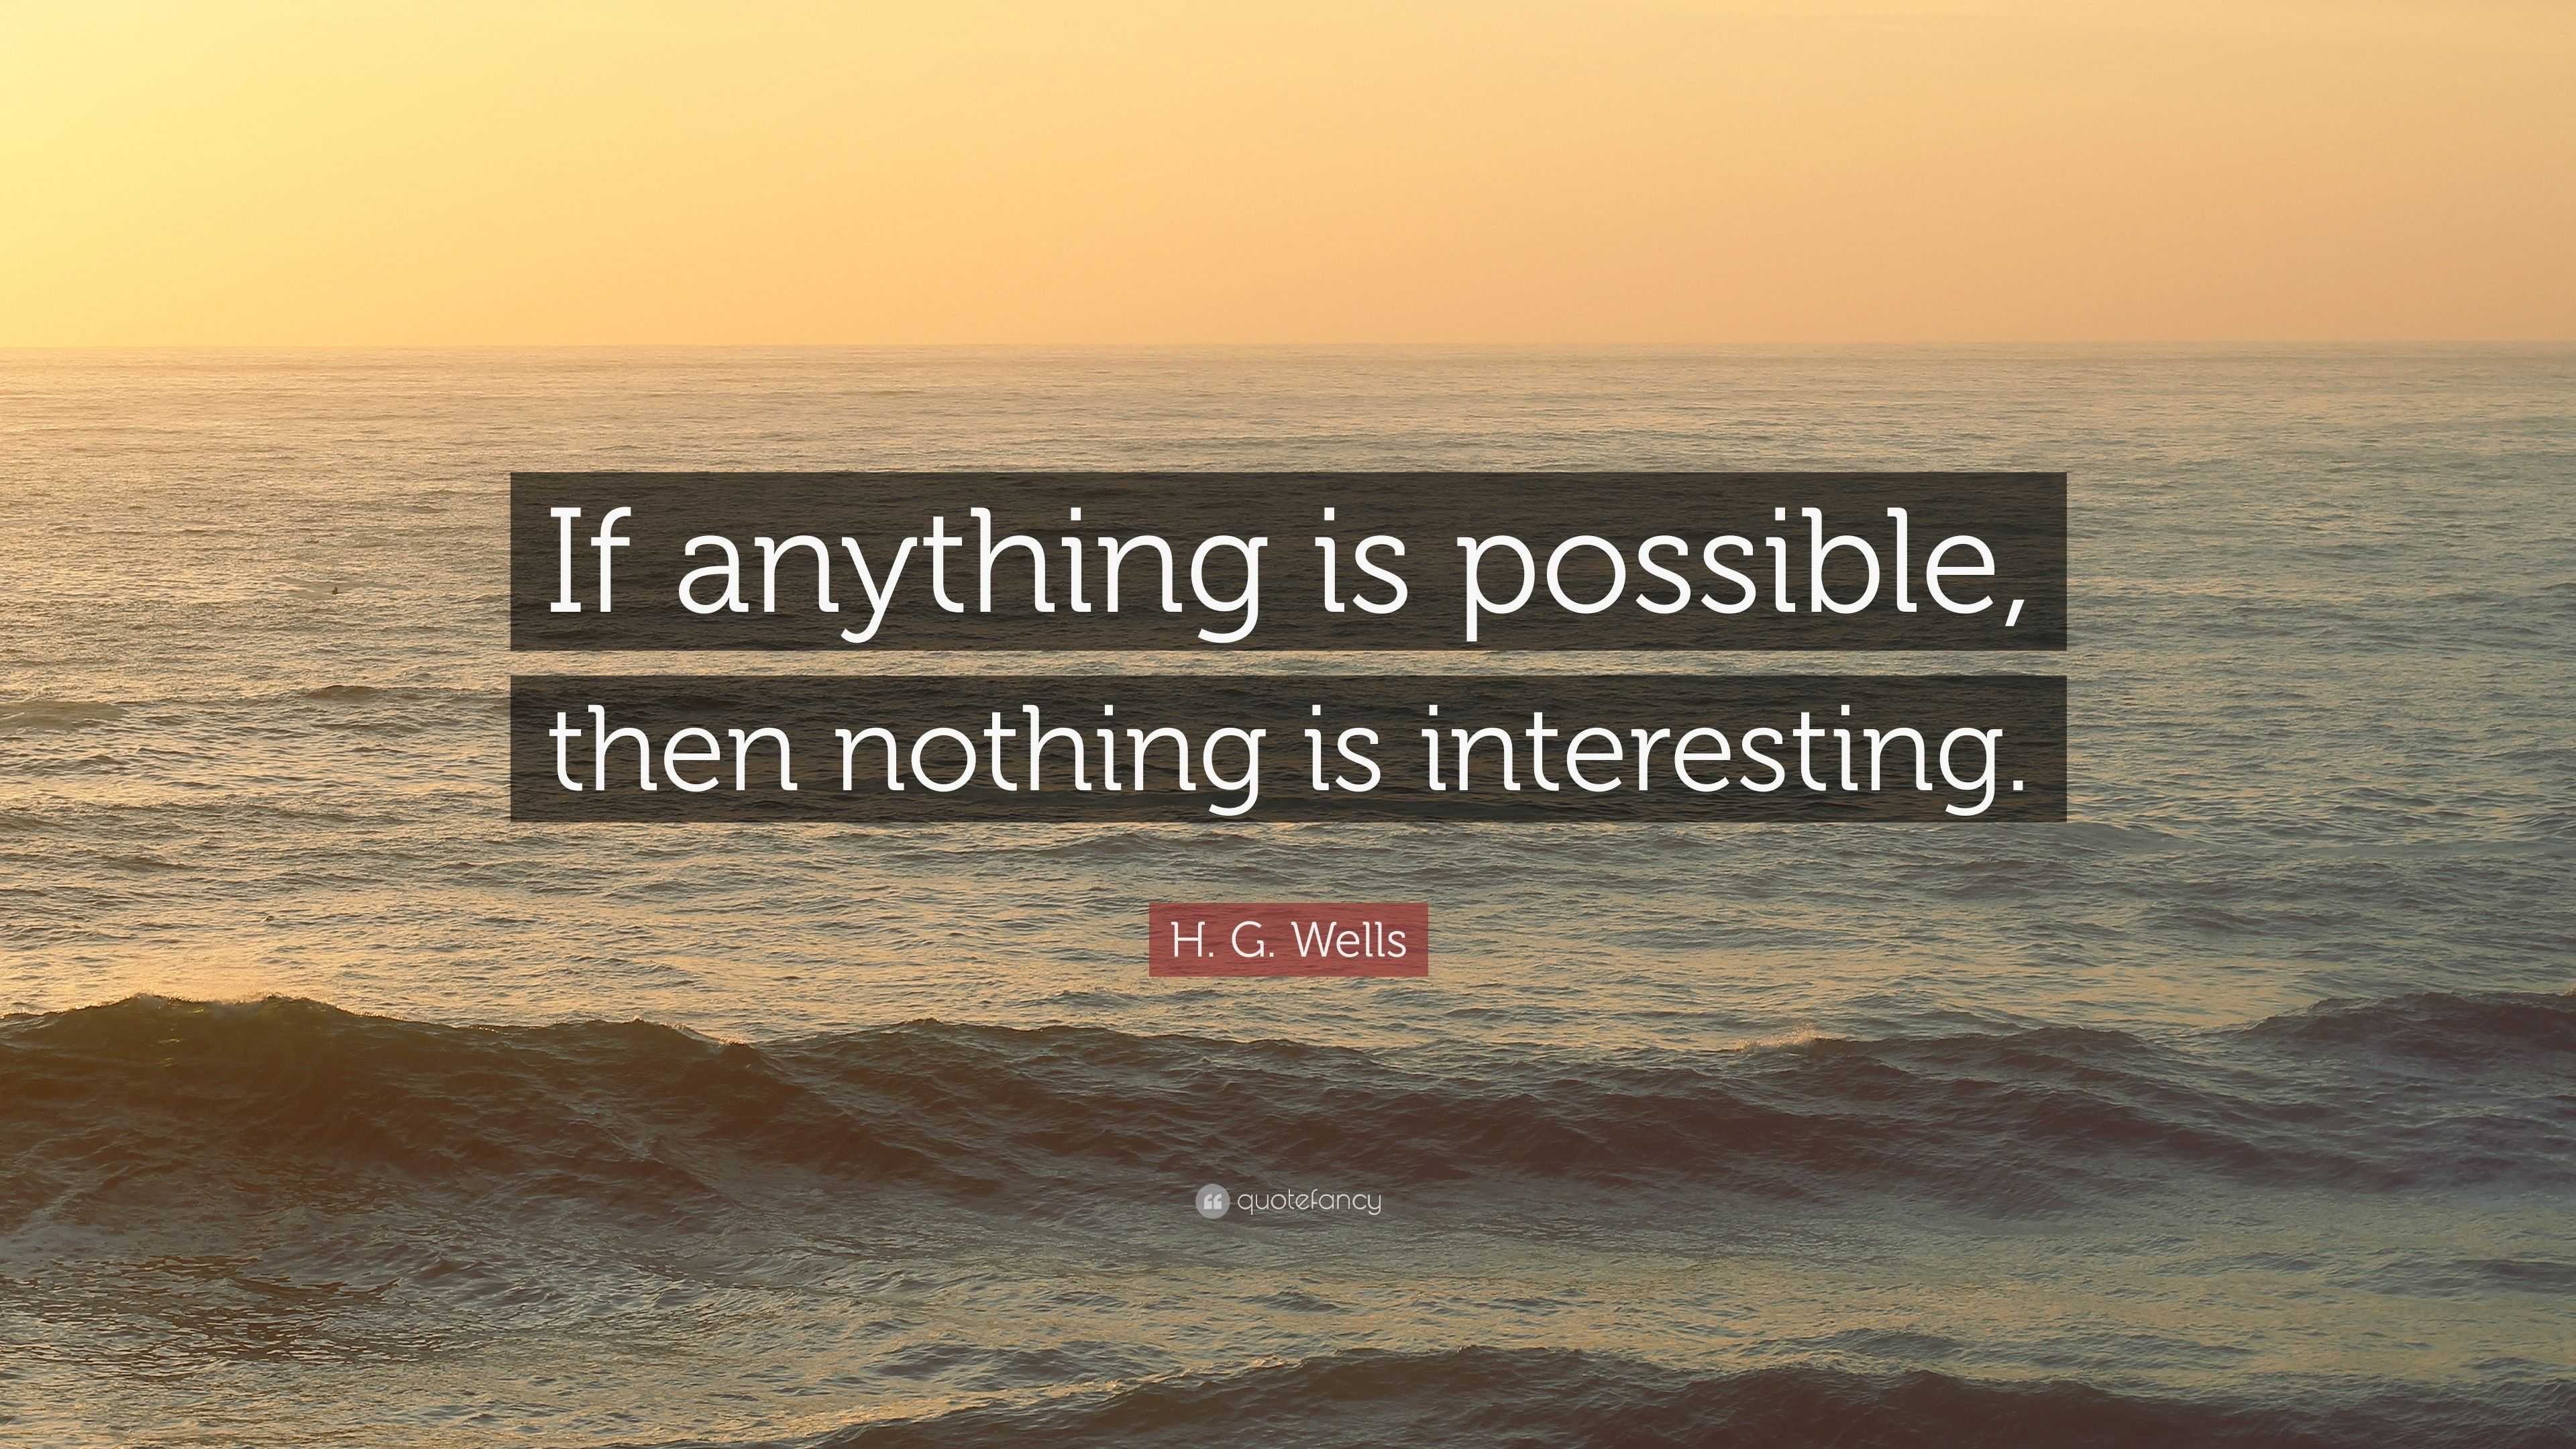 H. G. Wells Quote: “If anything is possible, then nothing is interesting.”